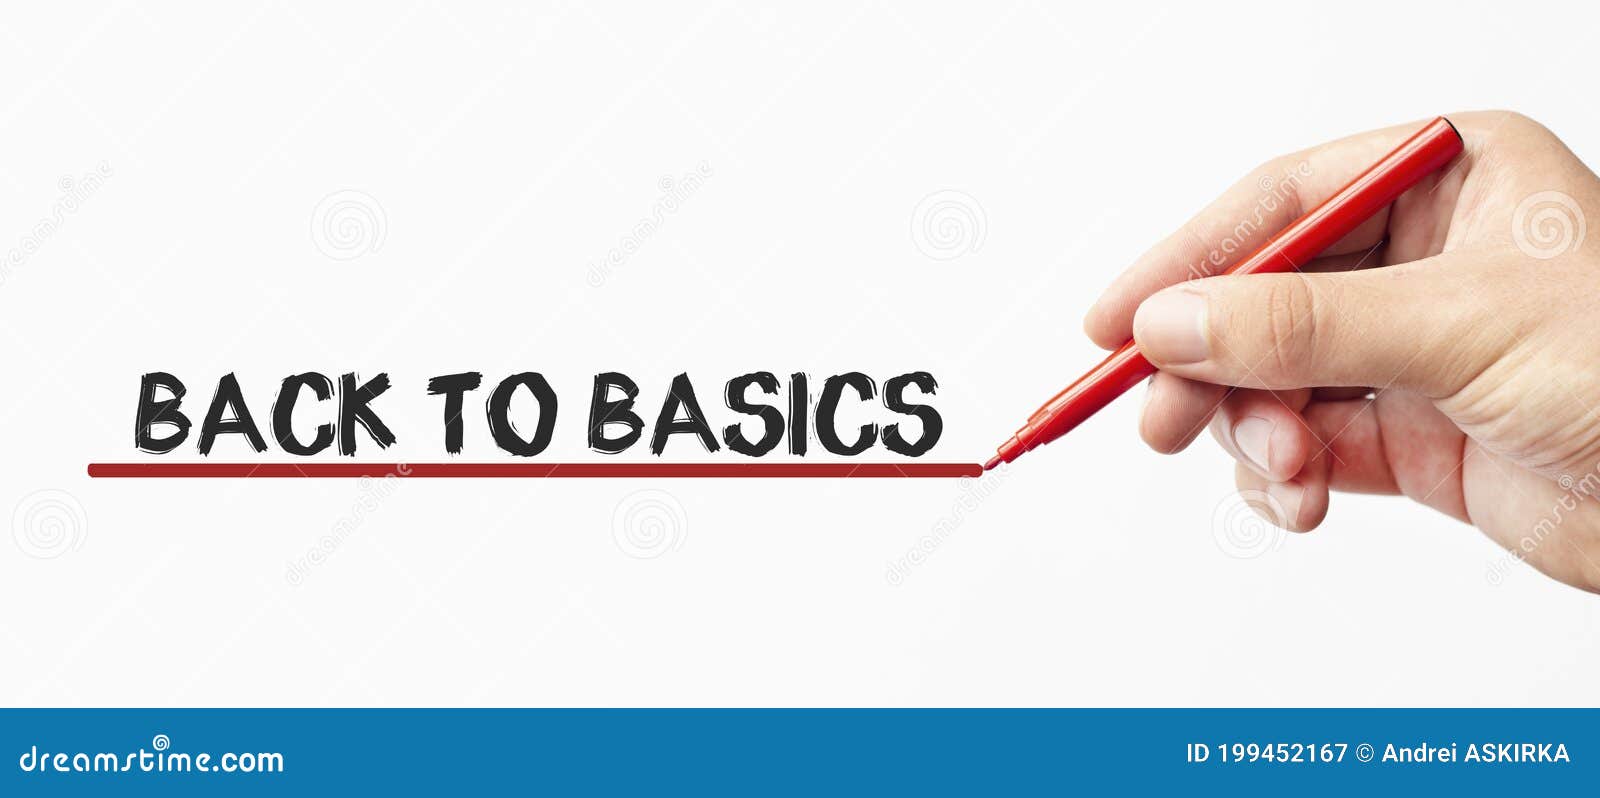 hand writing back to basics with red marker.  on white background. business, technology, internet concept. stock image